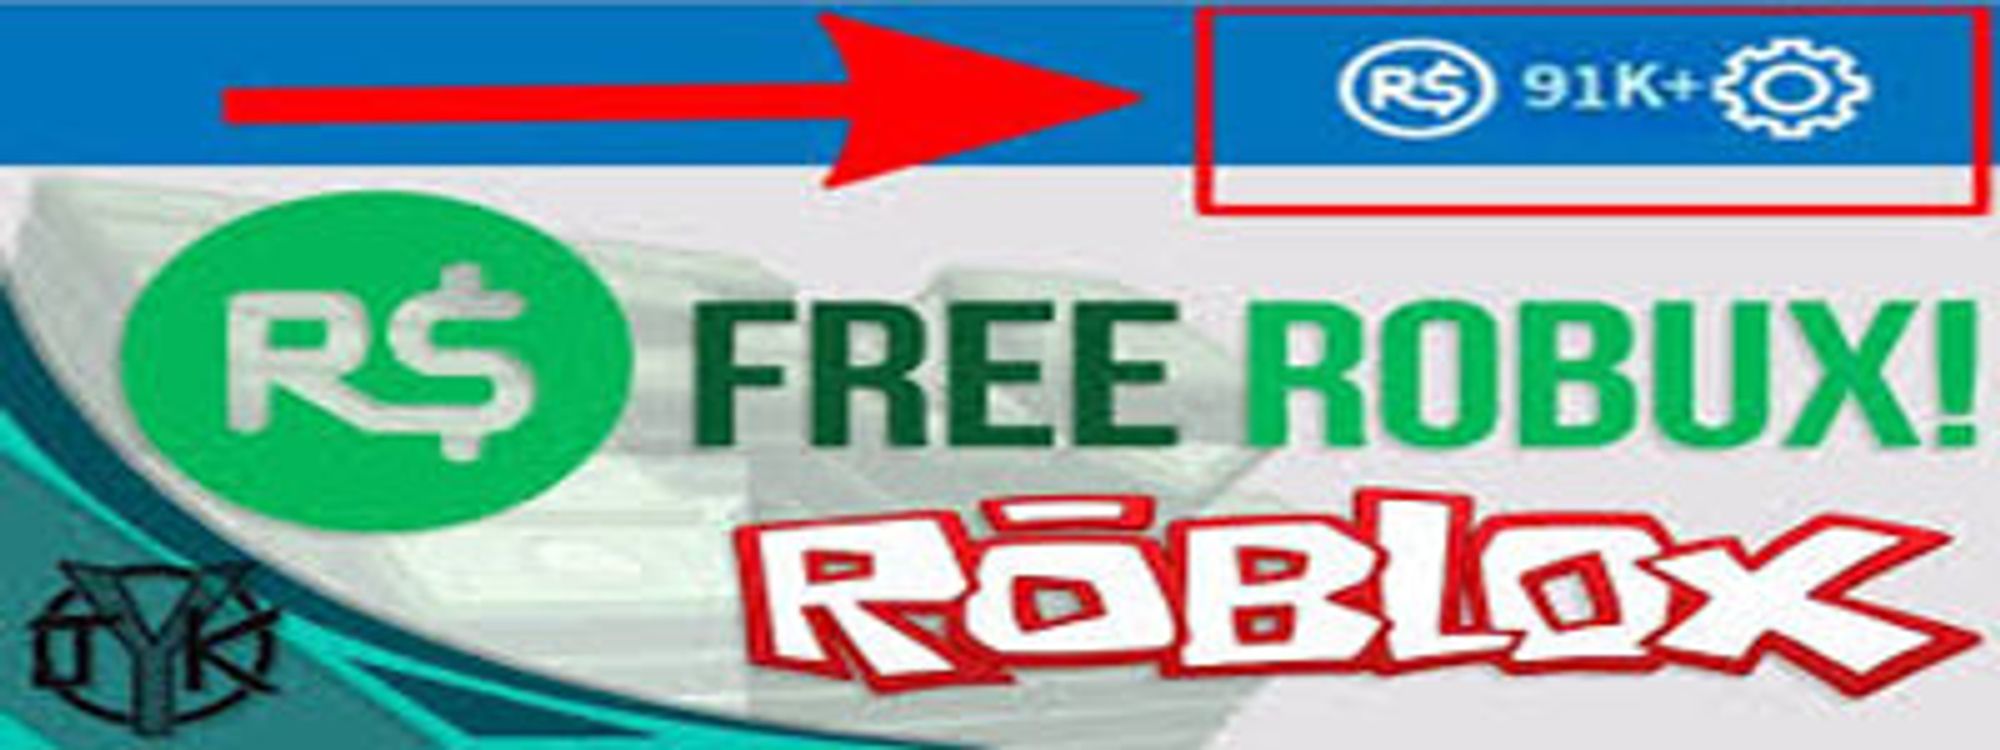 Roblox Robux Free Roblox Robux Codes With Skins Password Account 2020 - downloadhackedgames com roblox customize v4 roblox hack rbuxtool com roblox soiffure gratuite